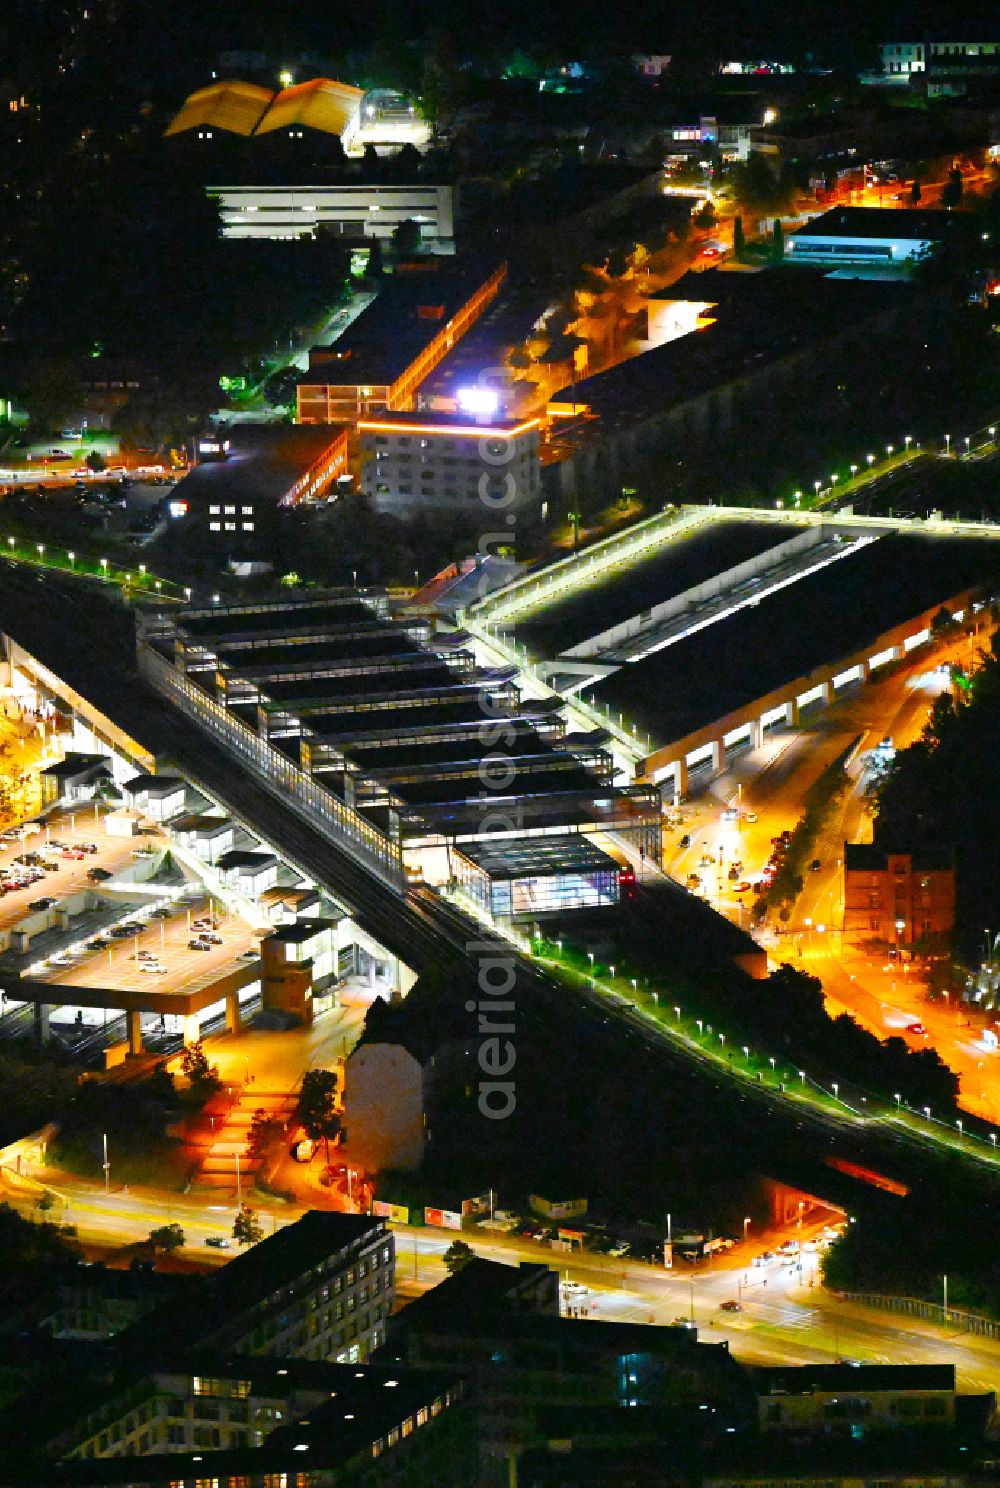 Berlin at night from above - Night lighting station building and track systems of the S-Bahn station Berlin Suedkreuz in the district Tempelhof-Schoeneberg in Berlin, Germany